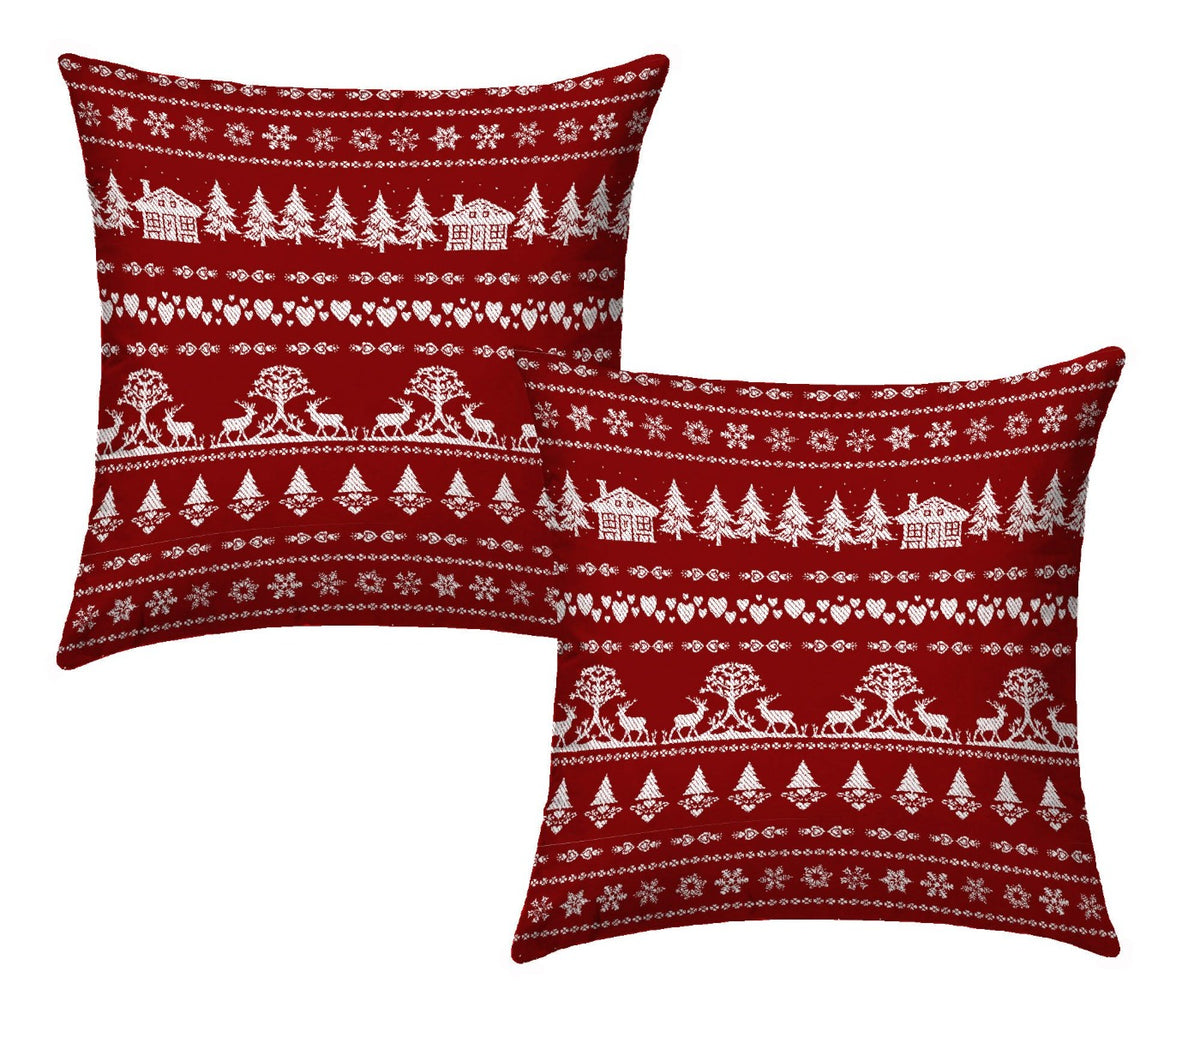 Pair of Cushion Covers for Furniture cm. 40x40 - REINDEER AND HUTS